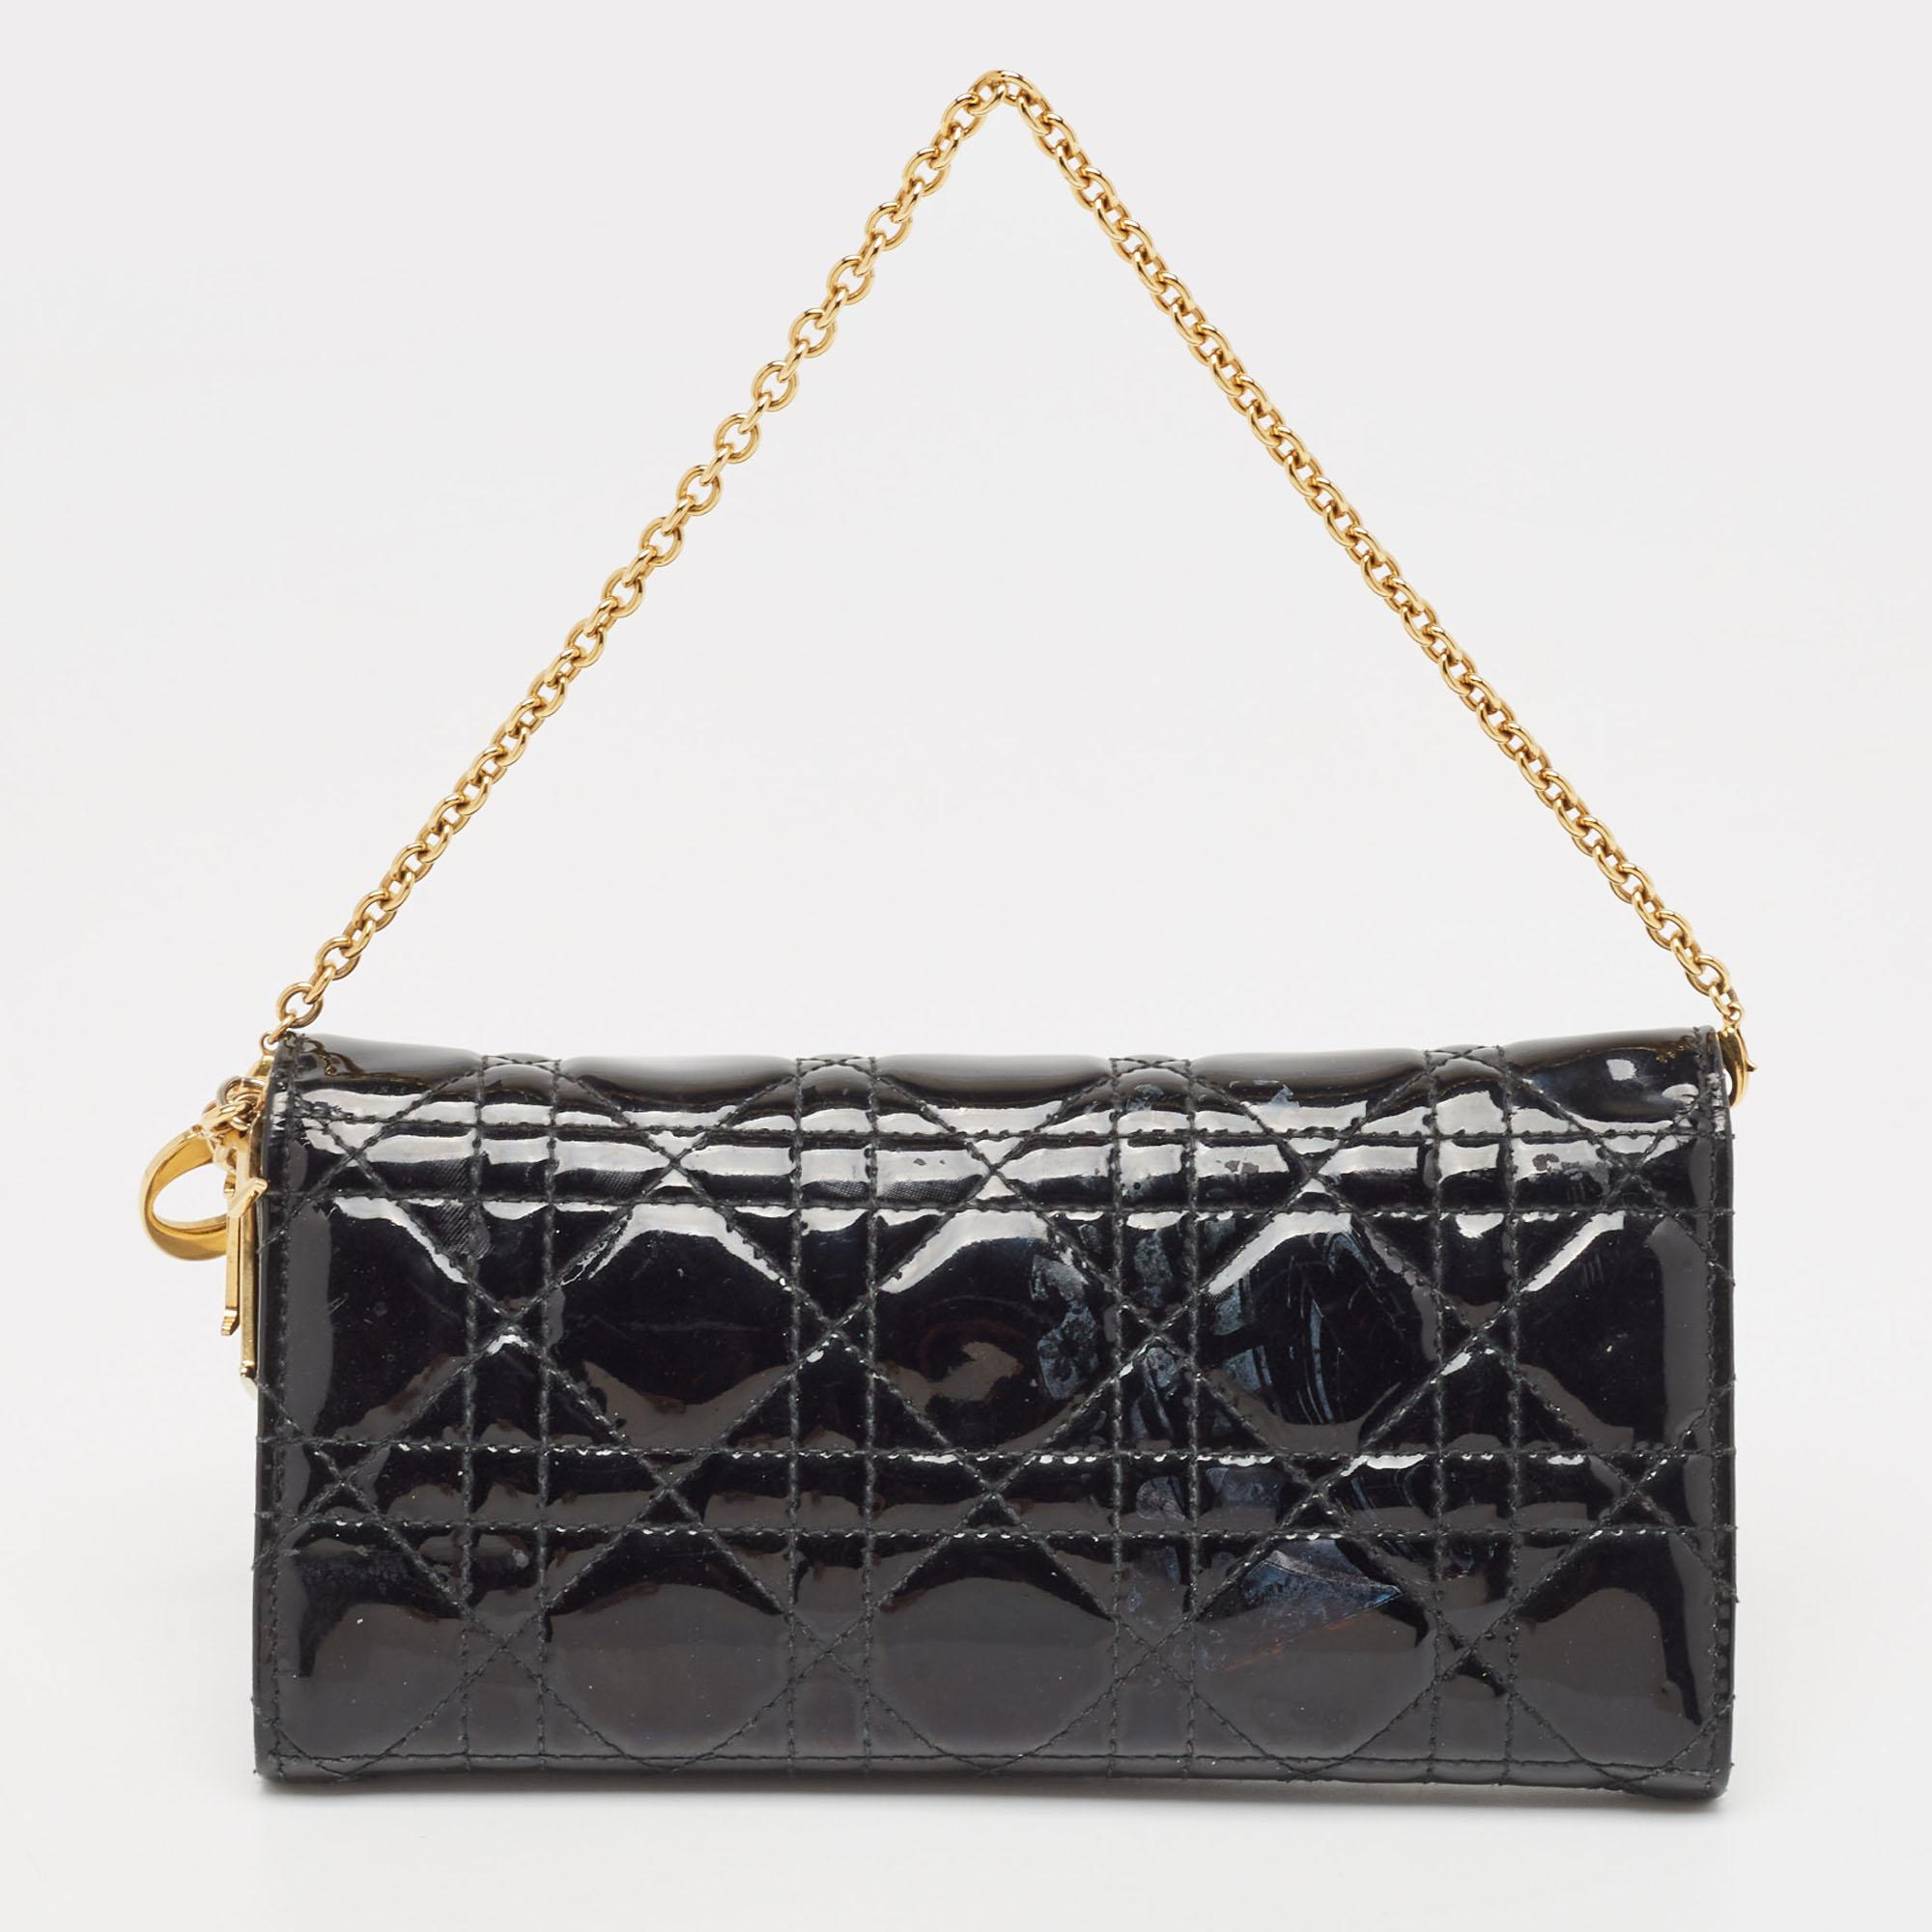 This Lady Dior wallet on chain is a coveted bag that every fashionista craves to possess. This black wallet has been crafted from leather and it carries the signature Cannage quilt. It is equipped with a leather & satin interior featuring multiple